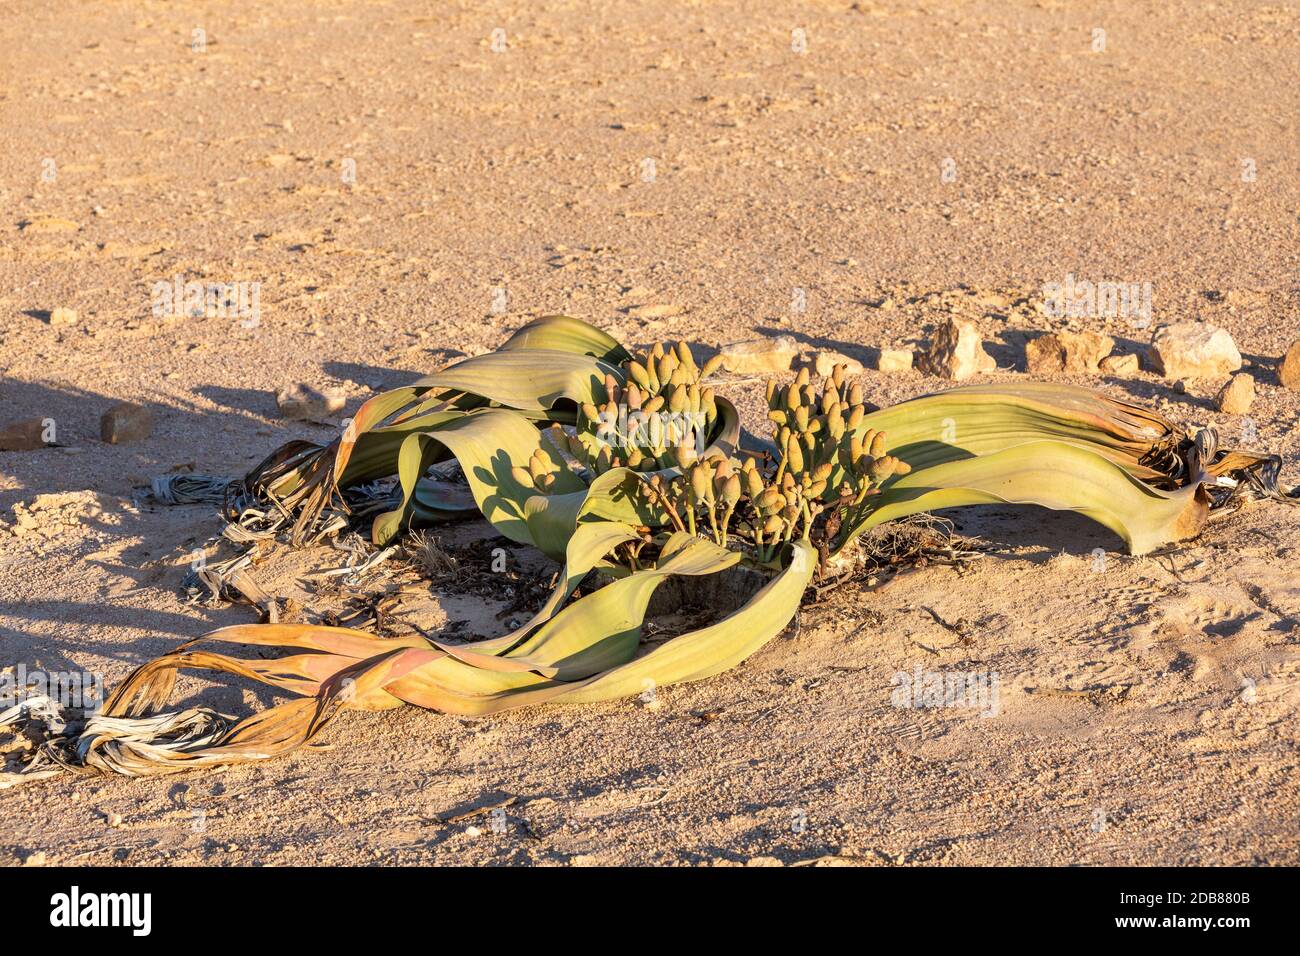 Welwitschia mirabilis flowering, in bloom with female cones beginning to shed seeds, thousand years old plant, Swakopmund, Erongo, Namibia, Amazing de Stock Photo